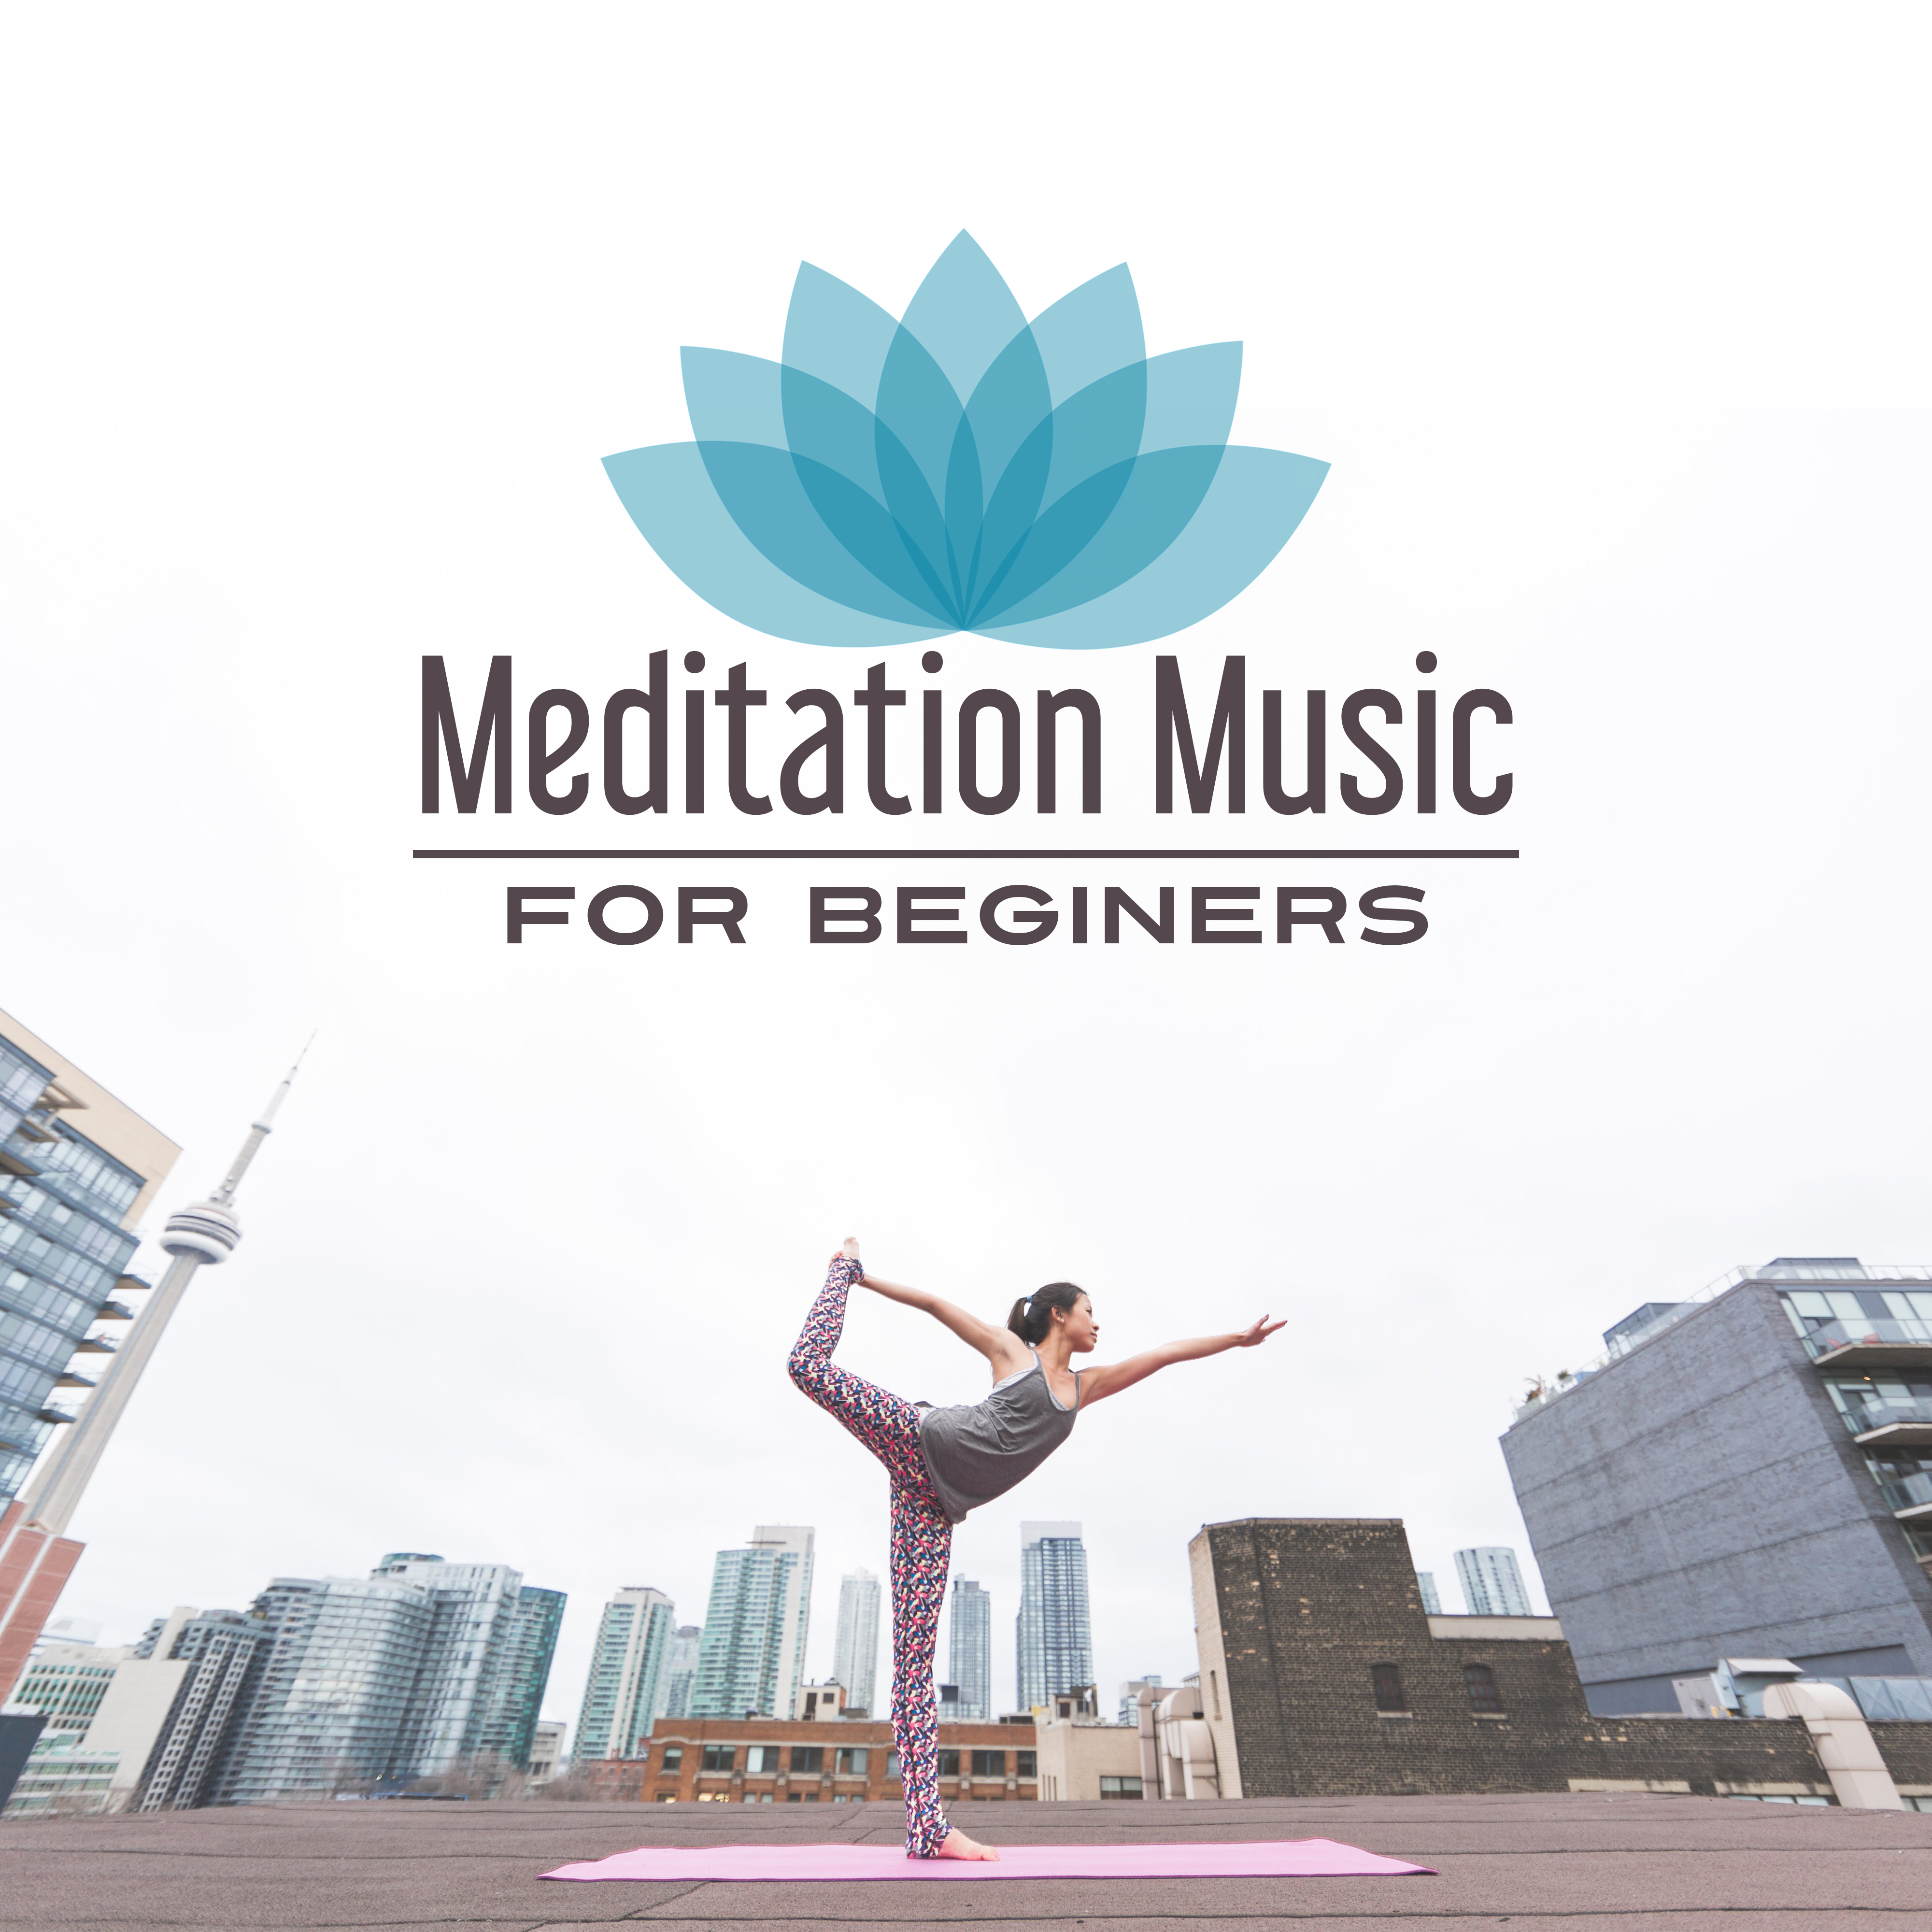 Meditation Music for Beginers  Peaceful New Age, Music for Meditation, Yoga, Pilates, Be Mindful